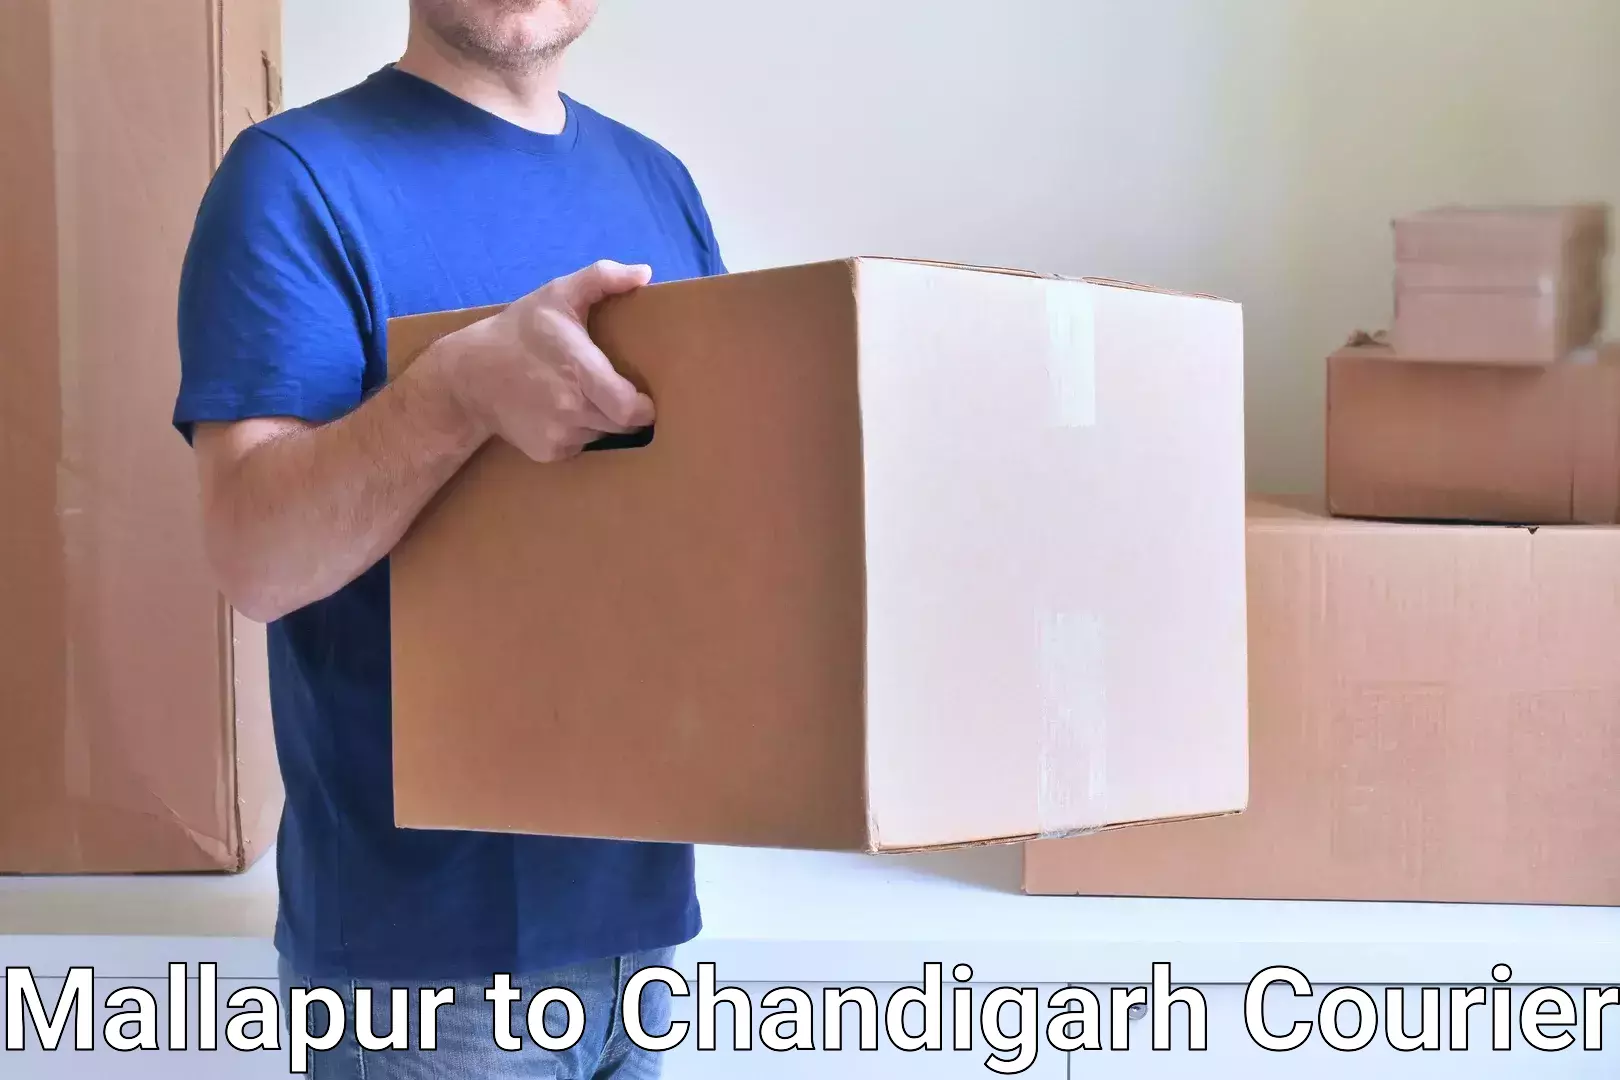 Small business couriers Mallapur to Chandigarh